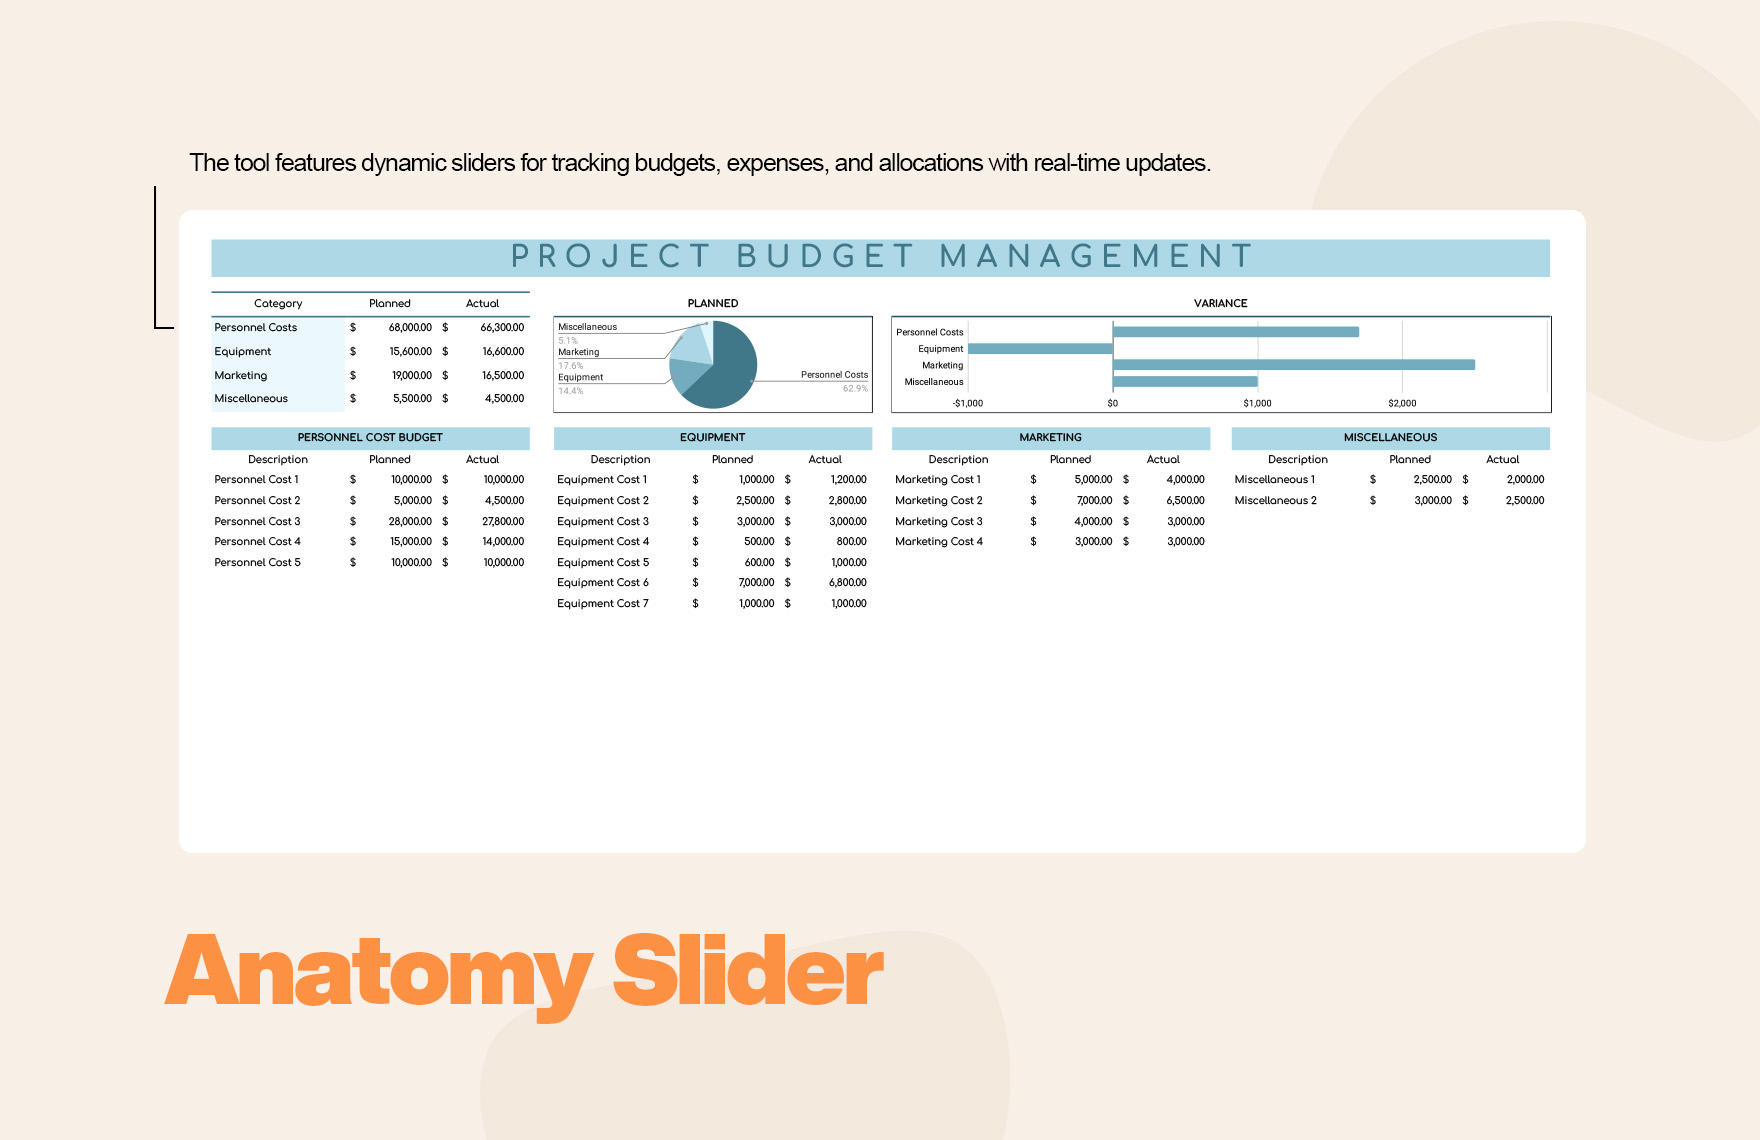 Project Budget Management Template